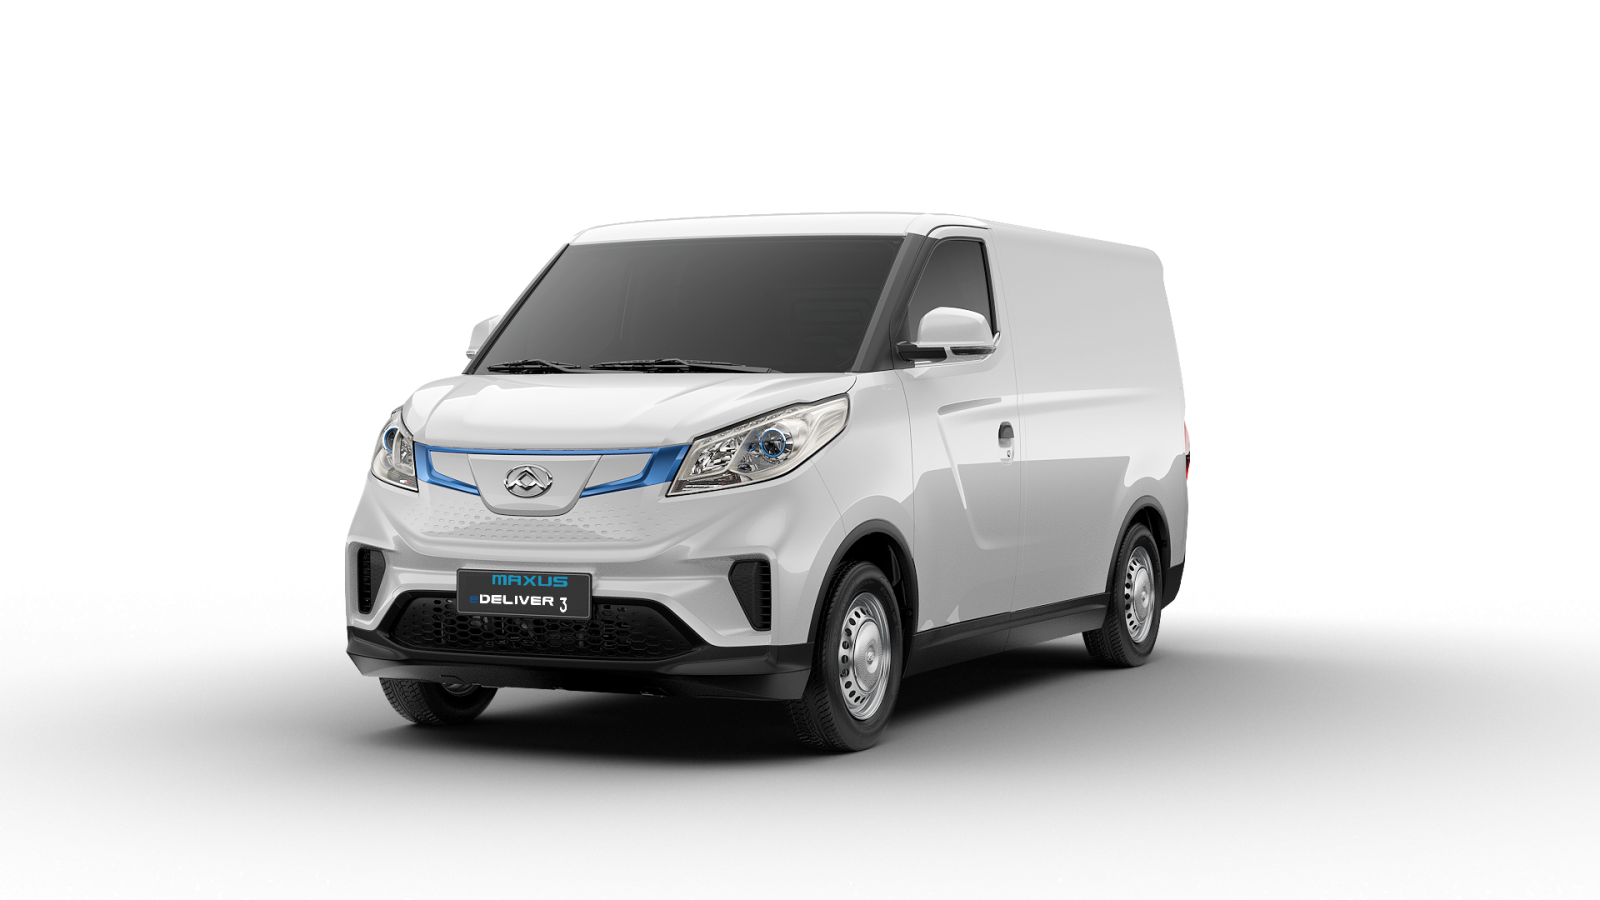 eDELIVER 3 fully electric small van